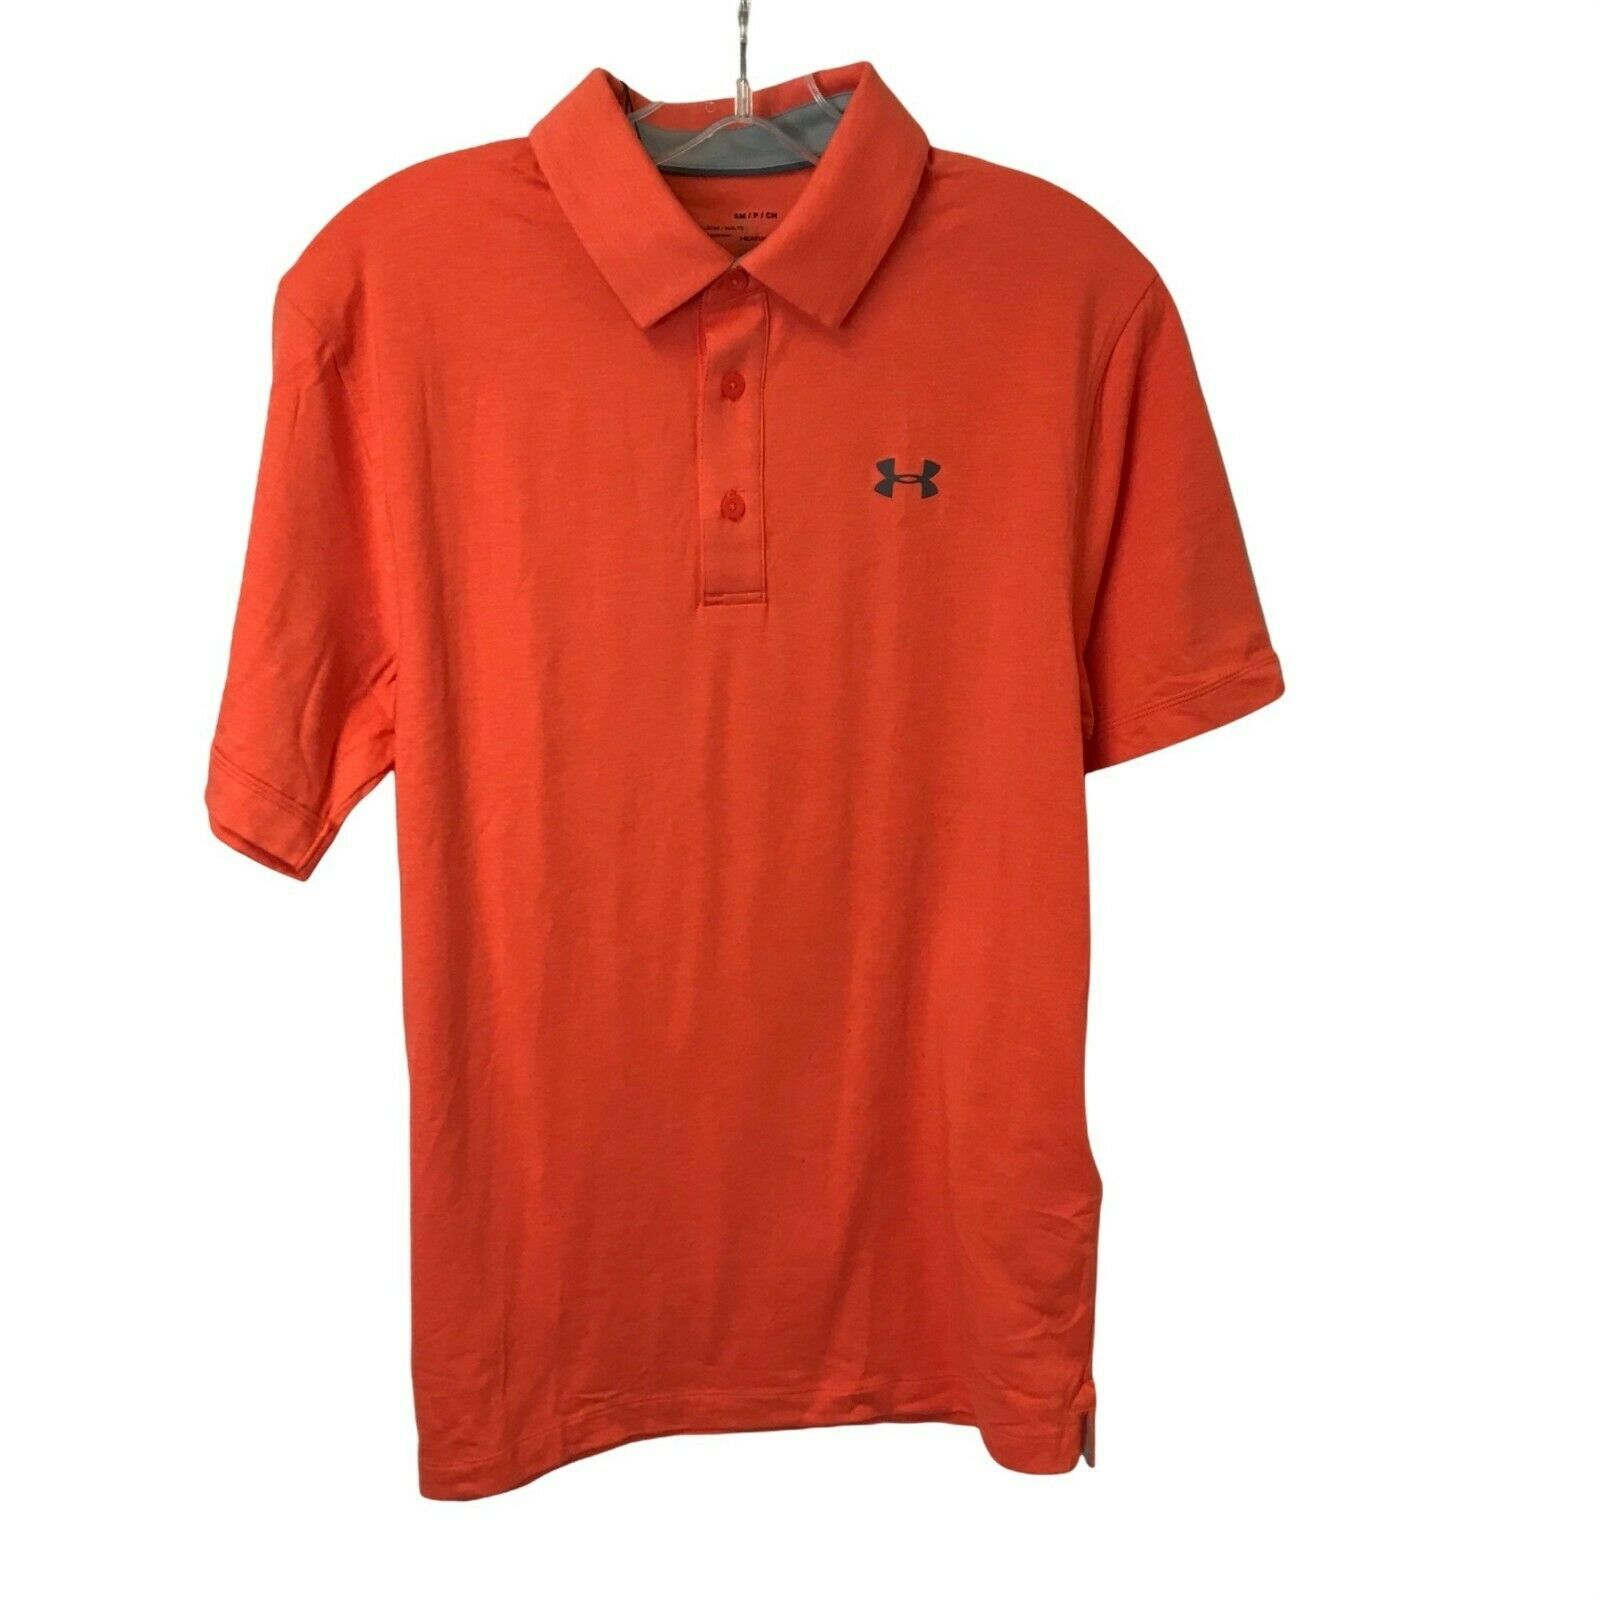 Under Armour Men Charged Cotton Scramble Polo (Size Small) - $43.54